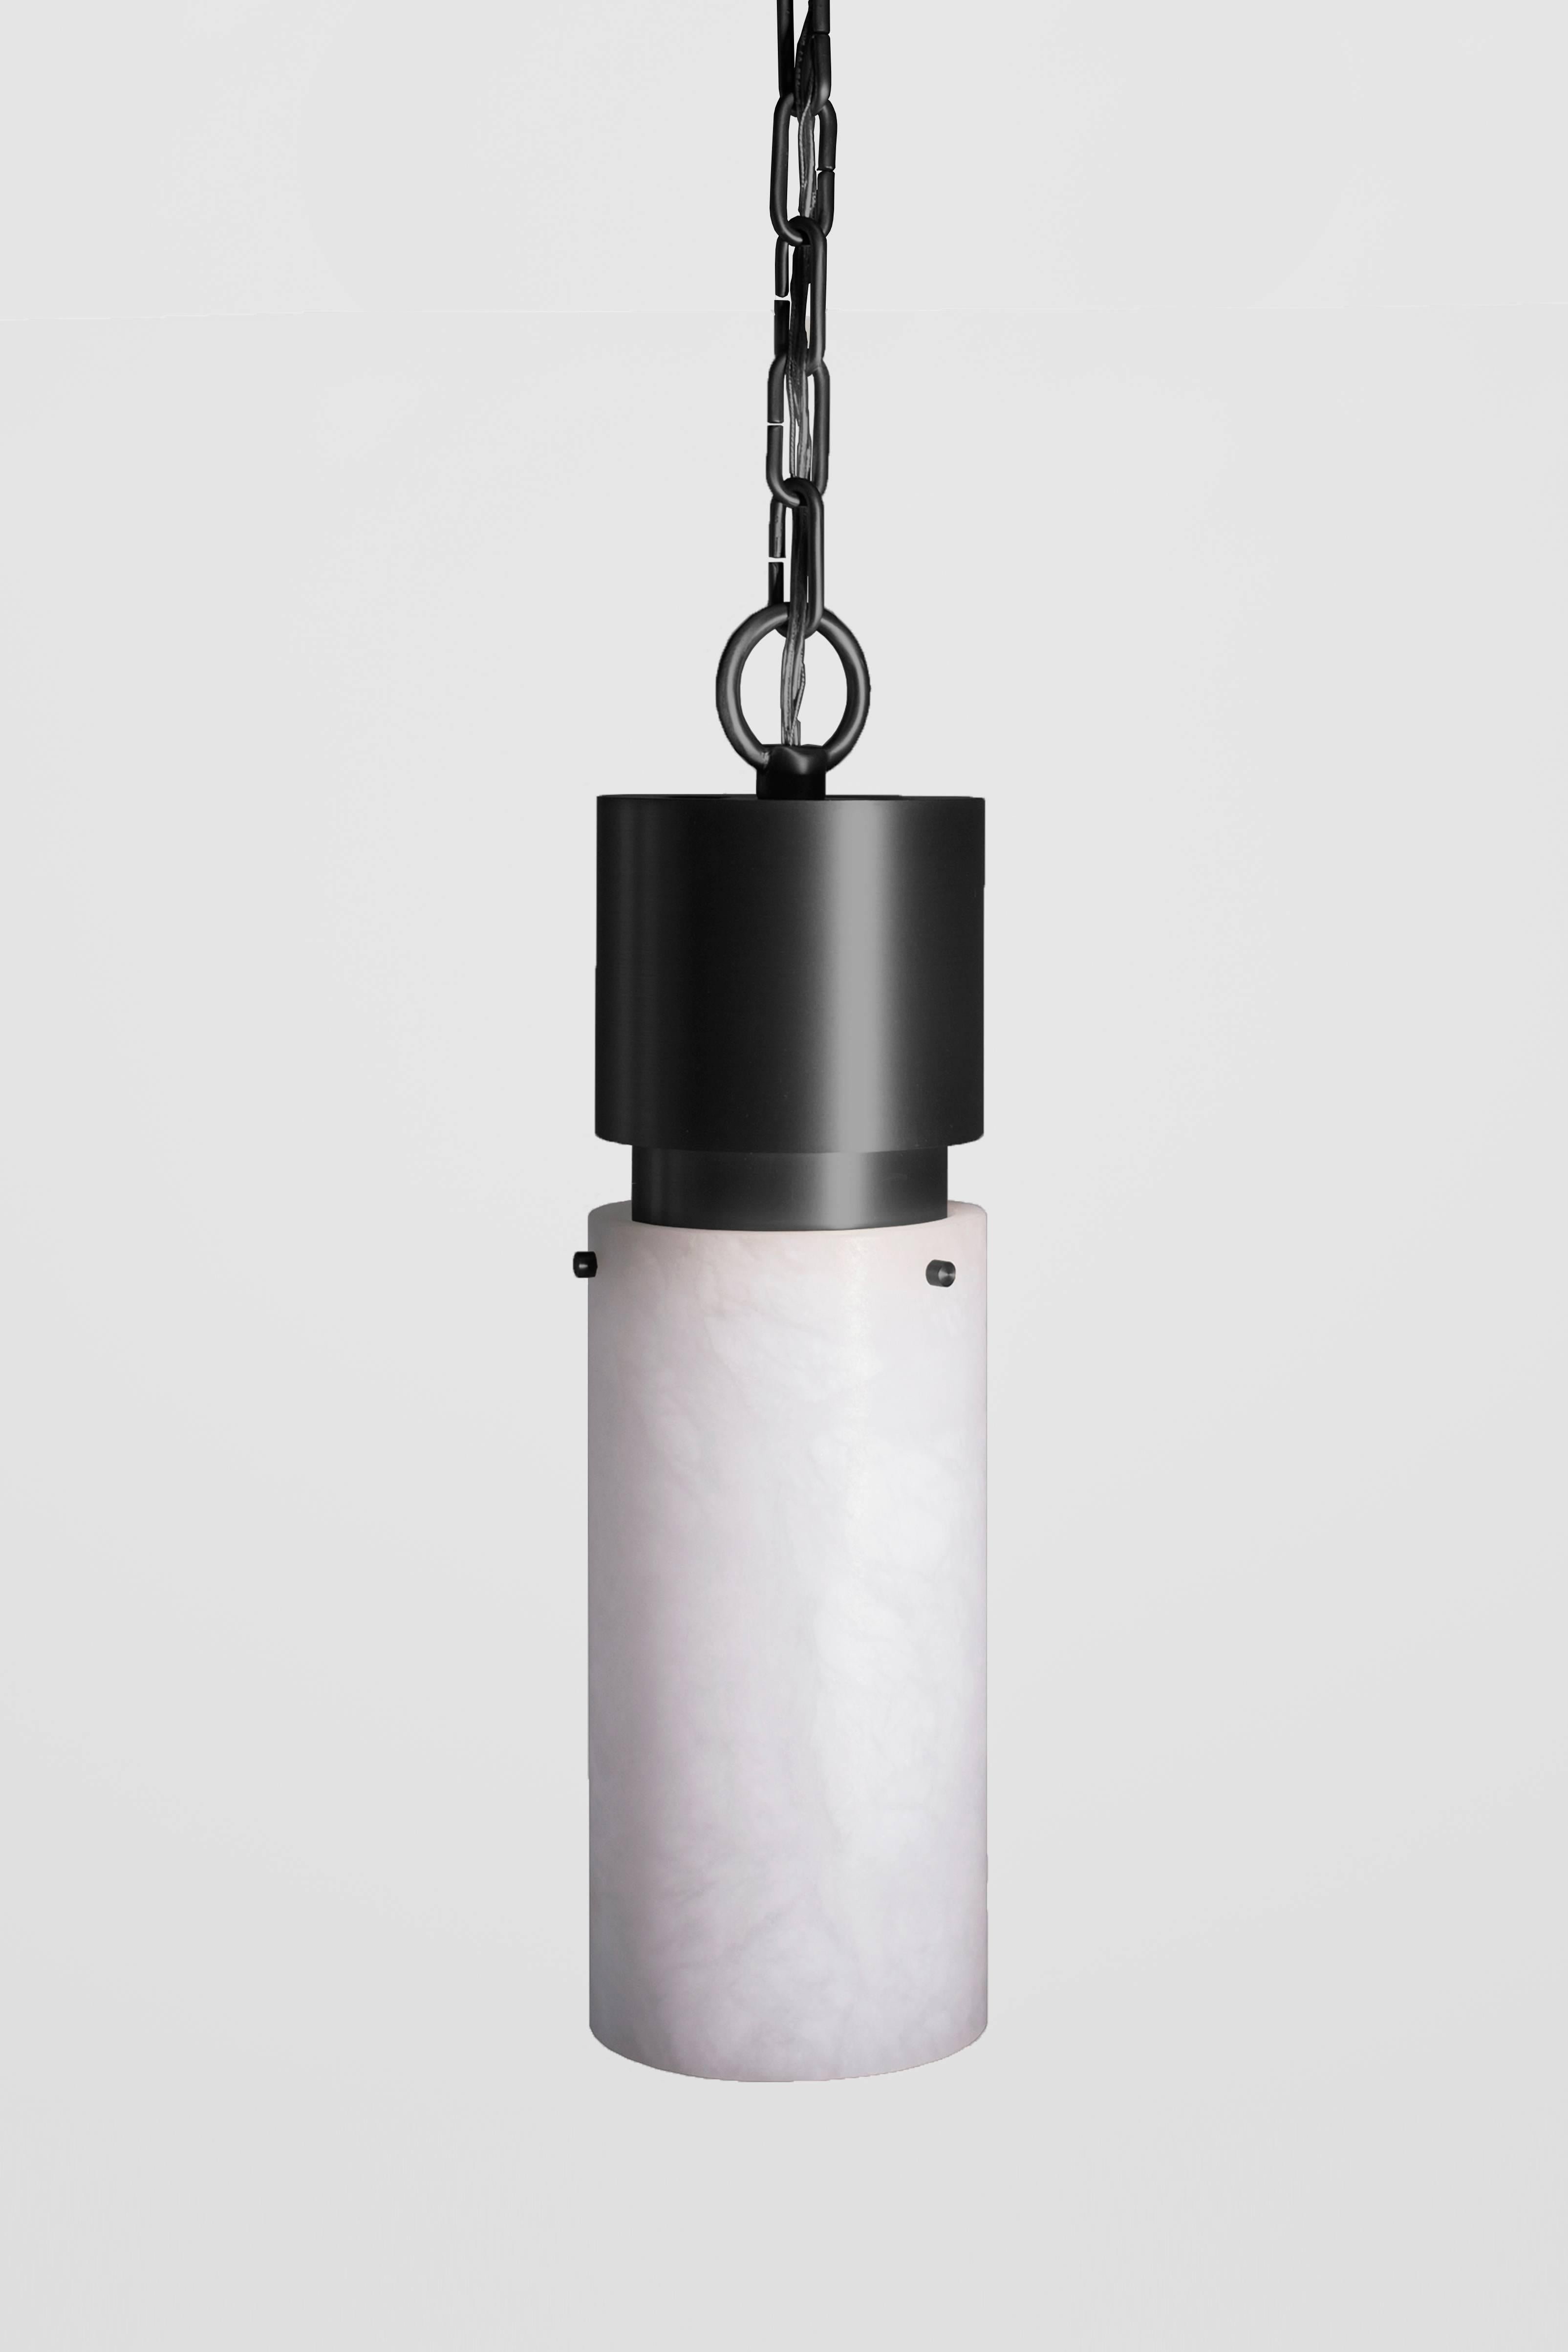 Orphan Work 000 Pendant
Shown in blackened brass and alabaster
Available in brushed brass, brushed nickel and blackened brass
Measures: 15 1/4” height x 5 3/8” diameter
Includes 3' of chain (rod available by request)
UL approved
Holds (1) 60w